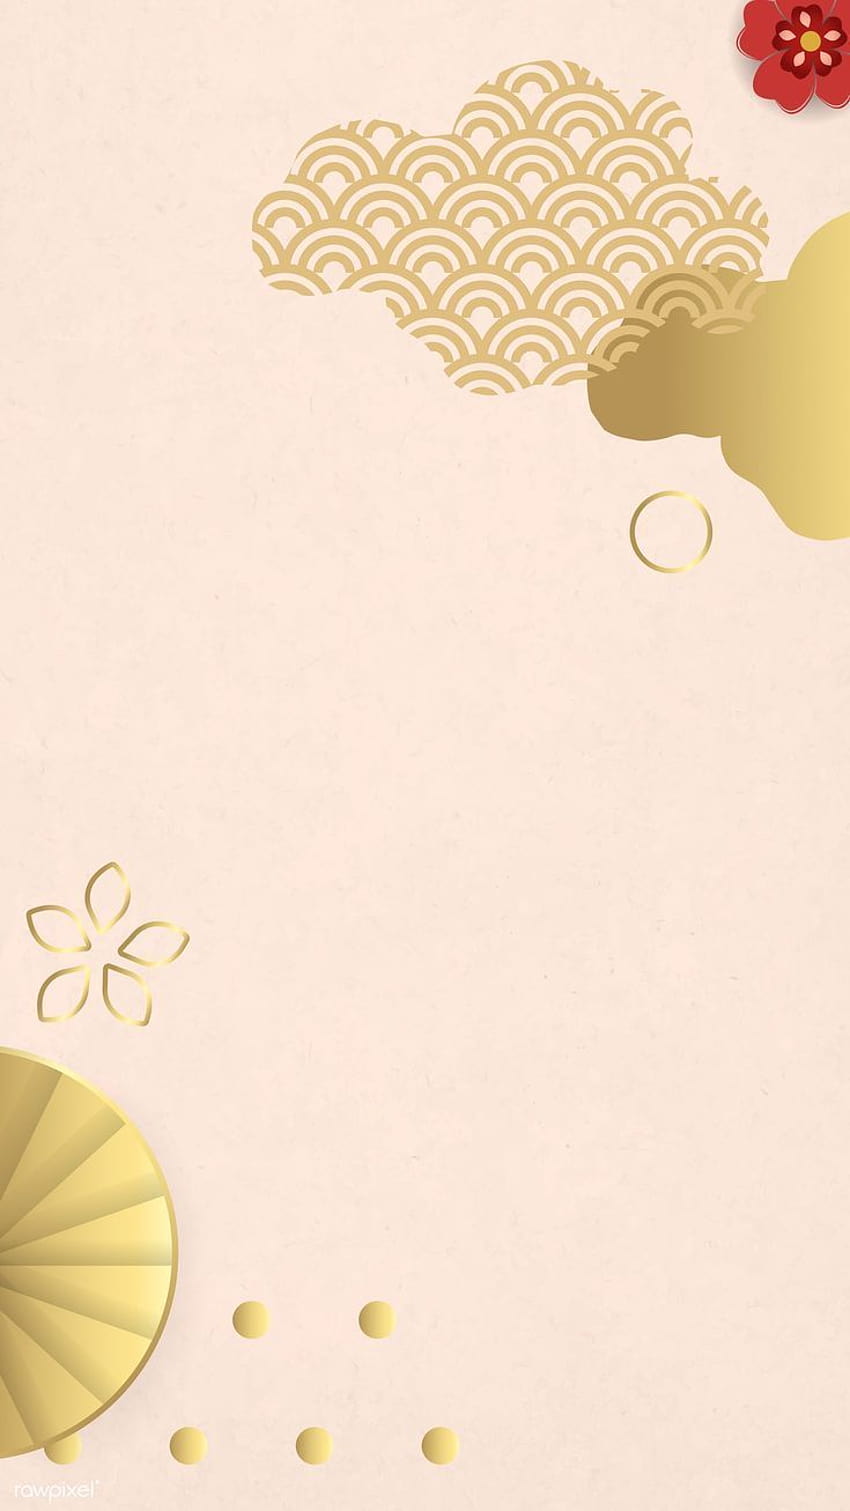 Download premium vector of Chinese new year background with a gold fan - New Year